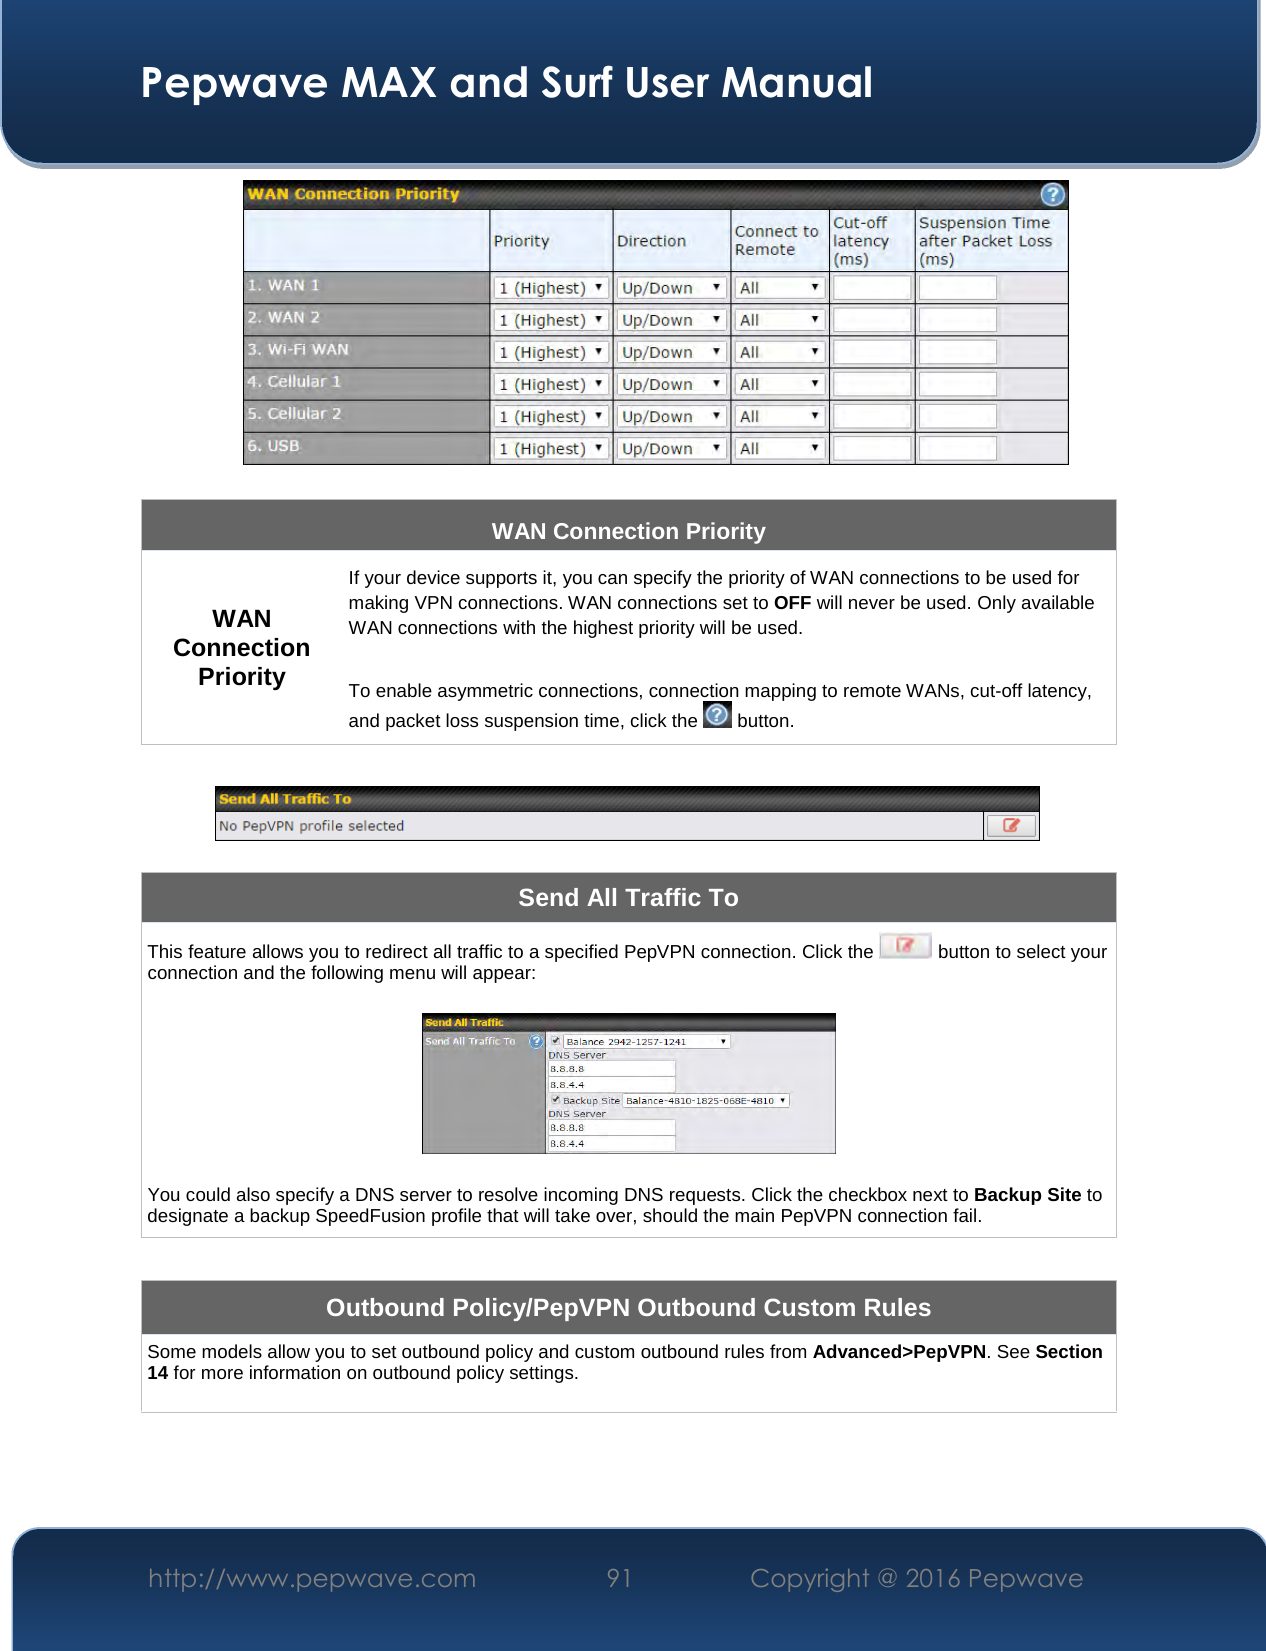  Pepwave MAX and Surf User Manual http://www.pepwave.com  91    Copyright @ 2016 Pepwave    8.41   WAN Connection Priority WAN Connection Priority If your device supports it, you can specify the priority of WAN connections to be used for making VPN connections. WAN connections set to OFF will never be used. Only available WAN connections with the highest priority will be used.   To enable asymmetric connections, connection mapping to remote WANs, cut-off latency, and packet loss suspension time, click the   button.    Send All Traffic To This feature allows you to redirect all traffic to a specified PepVPN connection. Click the   button to select your connection and the following menu will appear:    You could also specify a DNS server to resolve incoming DNS requests. Click the checkbox next to Backup Site to designate a backup SpeedFusion profile that will take over, should the main PepVPN connection fail.  Outbound Policy/PepVPN Outbound Custom Rules Some models allow you to set outbound policy and custom outbound rules from Advanced&gt;PepVPN. See Section 14 for more information on outbound policy settings.   